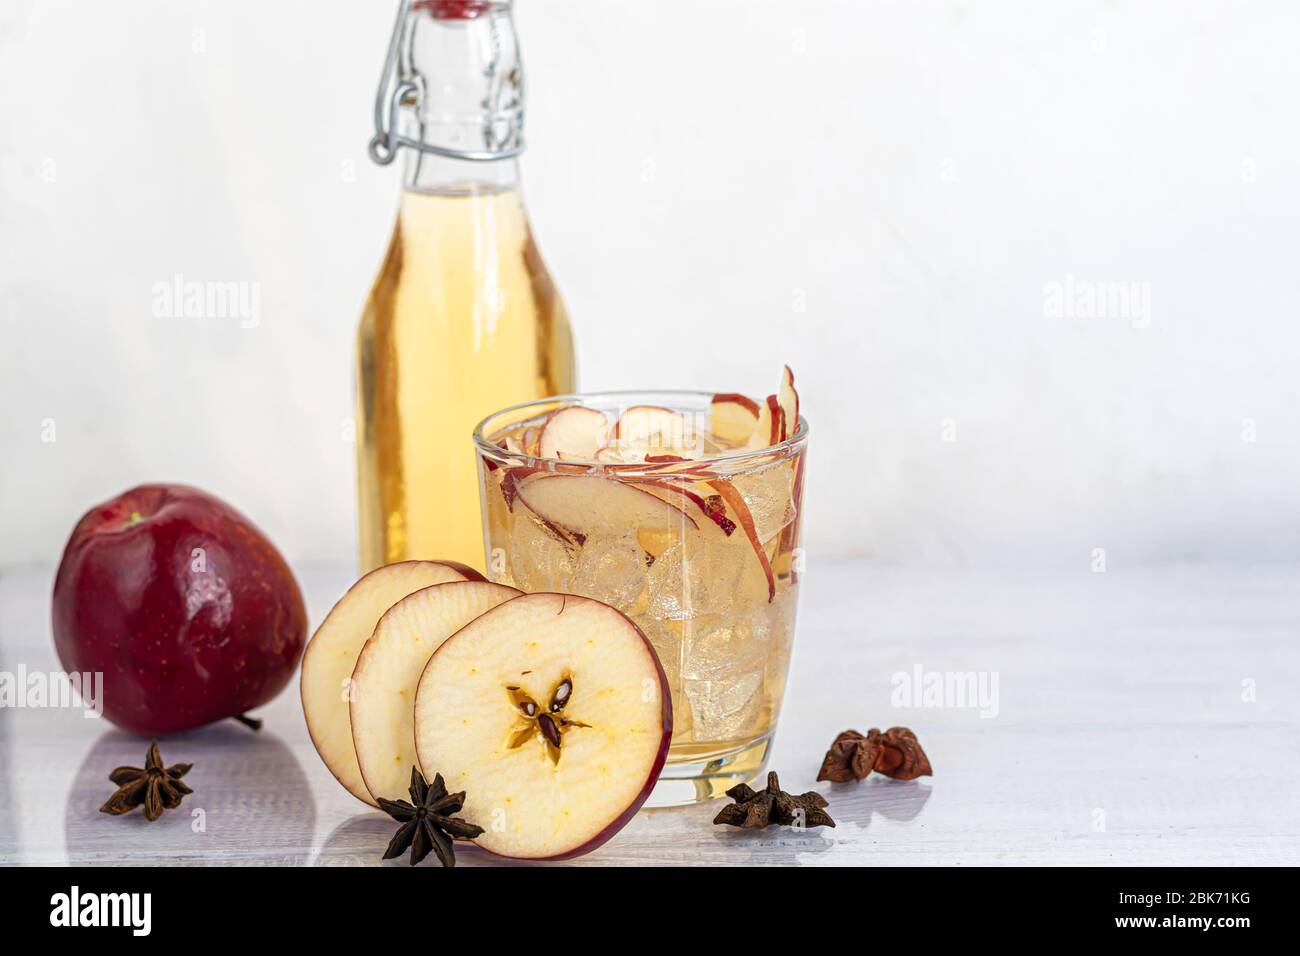 Healthy organic foods. Apple cider in a glass bowl and fresh red apples on a light background. In a glass of ice cubes and nearby cinnamon sticks. Cop Stock Photo